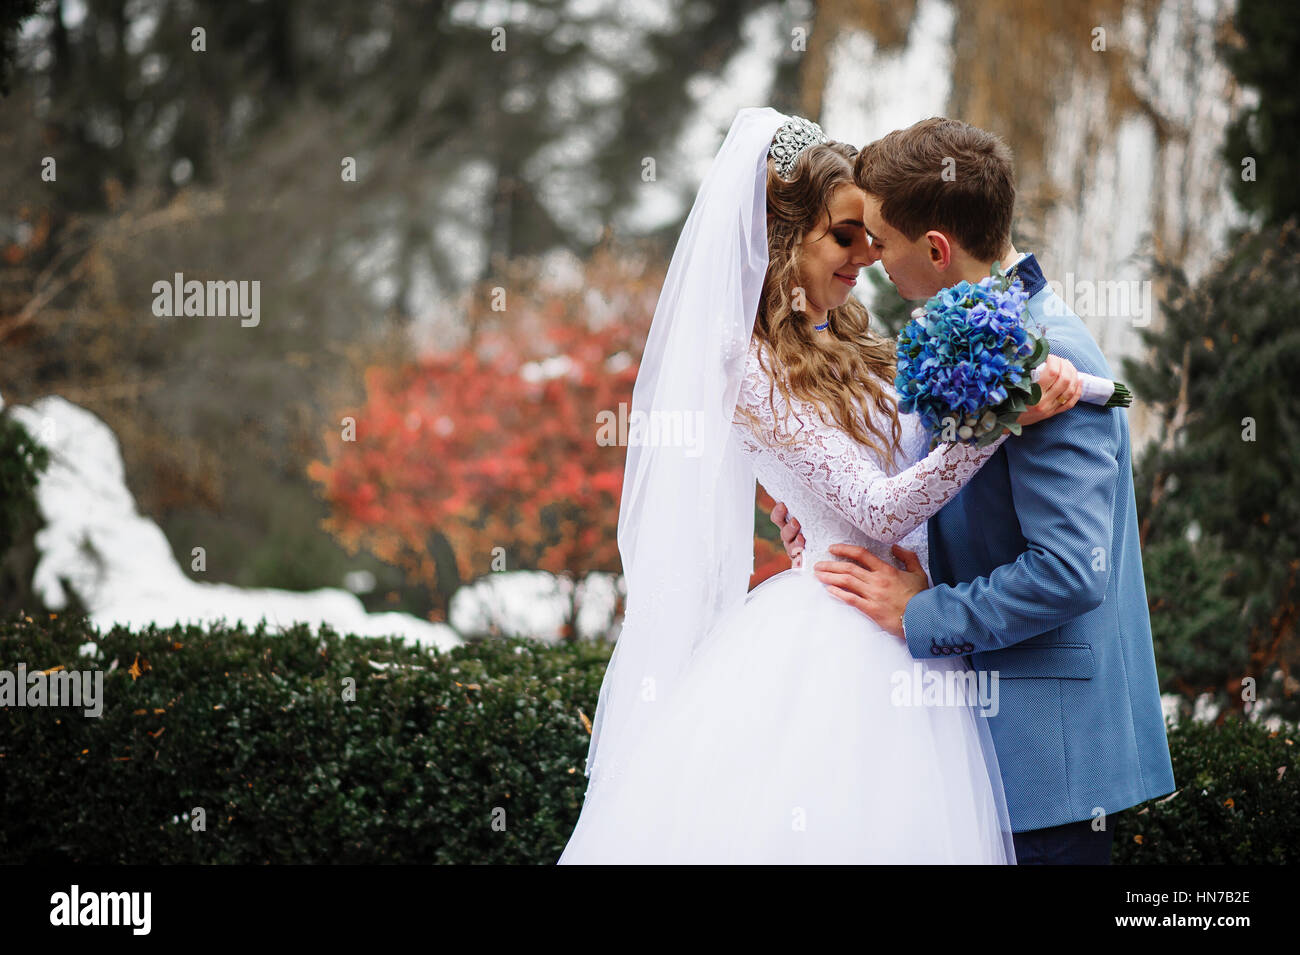 Someone special lovely wedding couple in love at winter day. Stock Photo